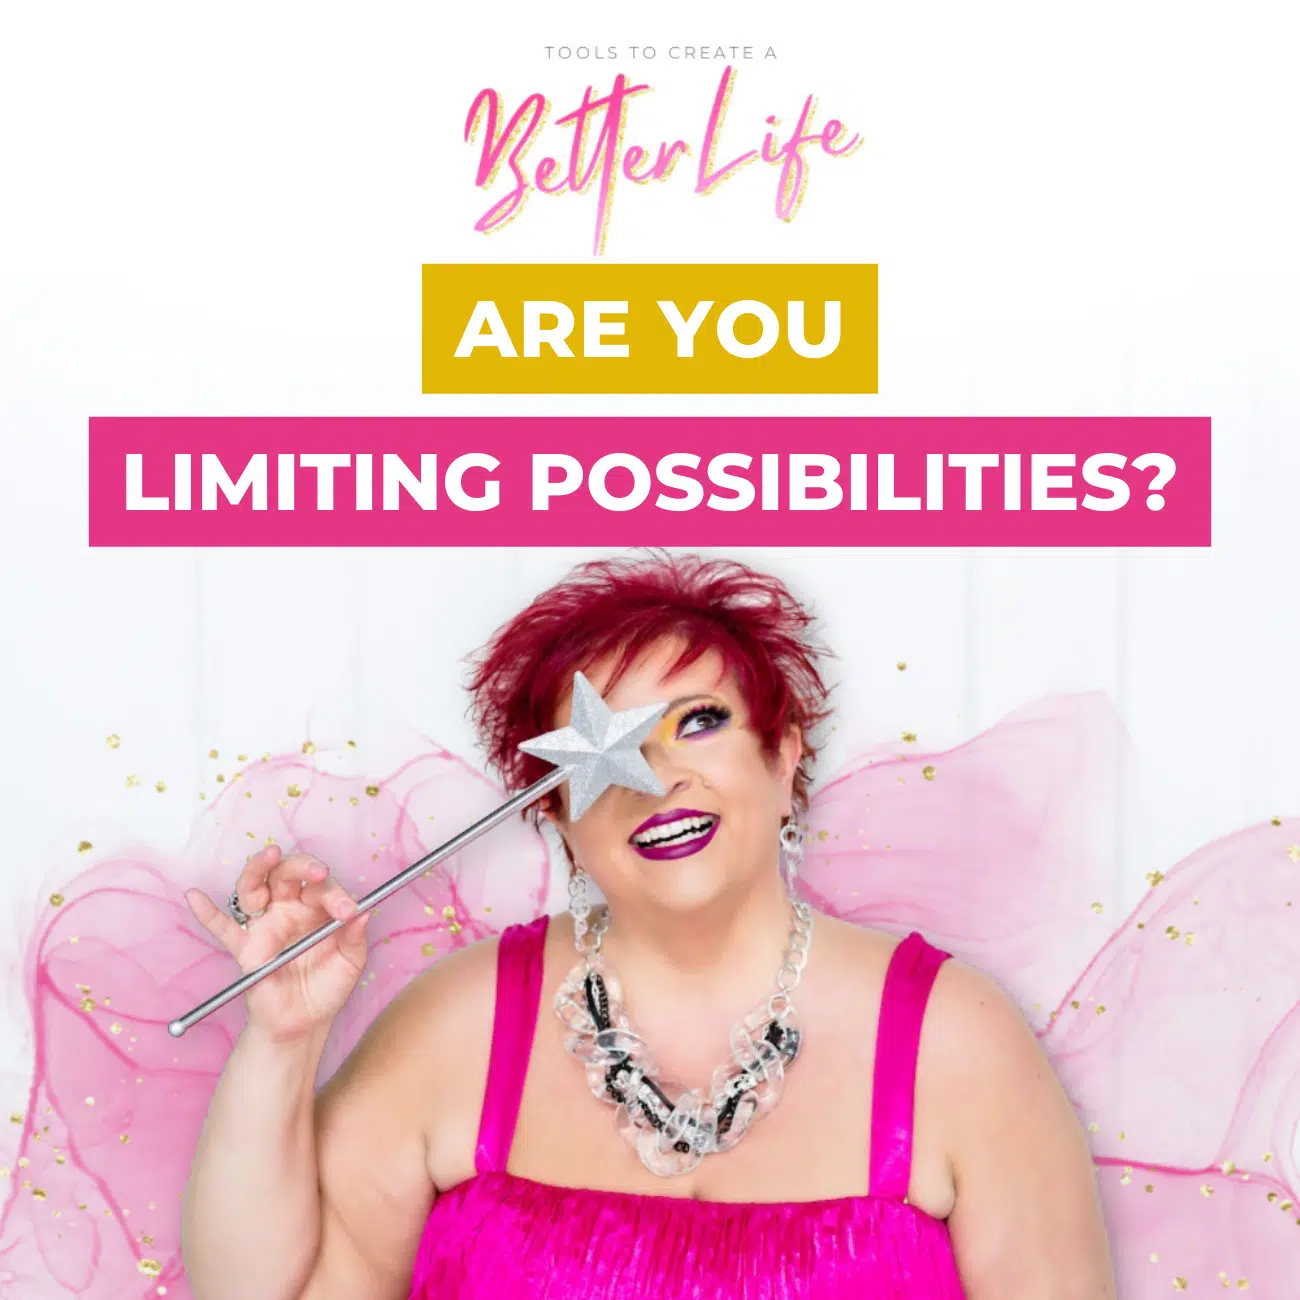 Are You Limiting Possibilities?